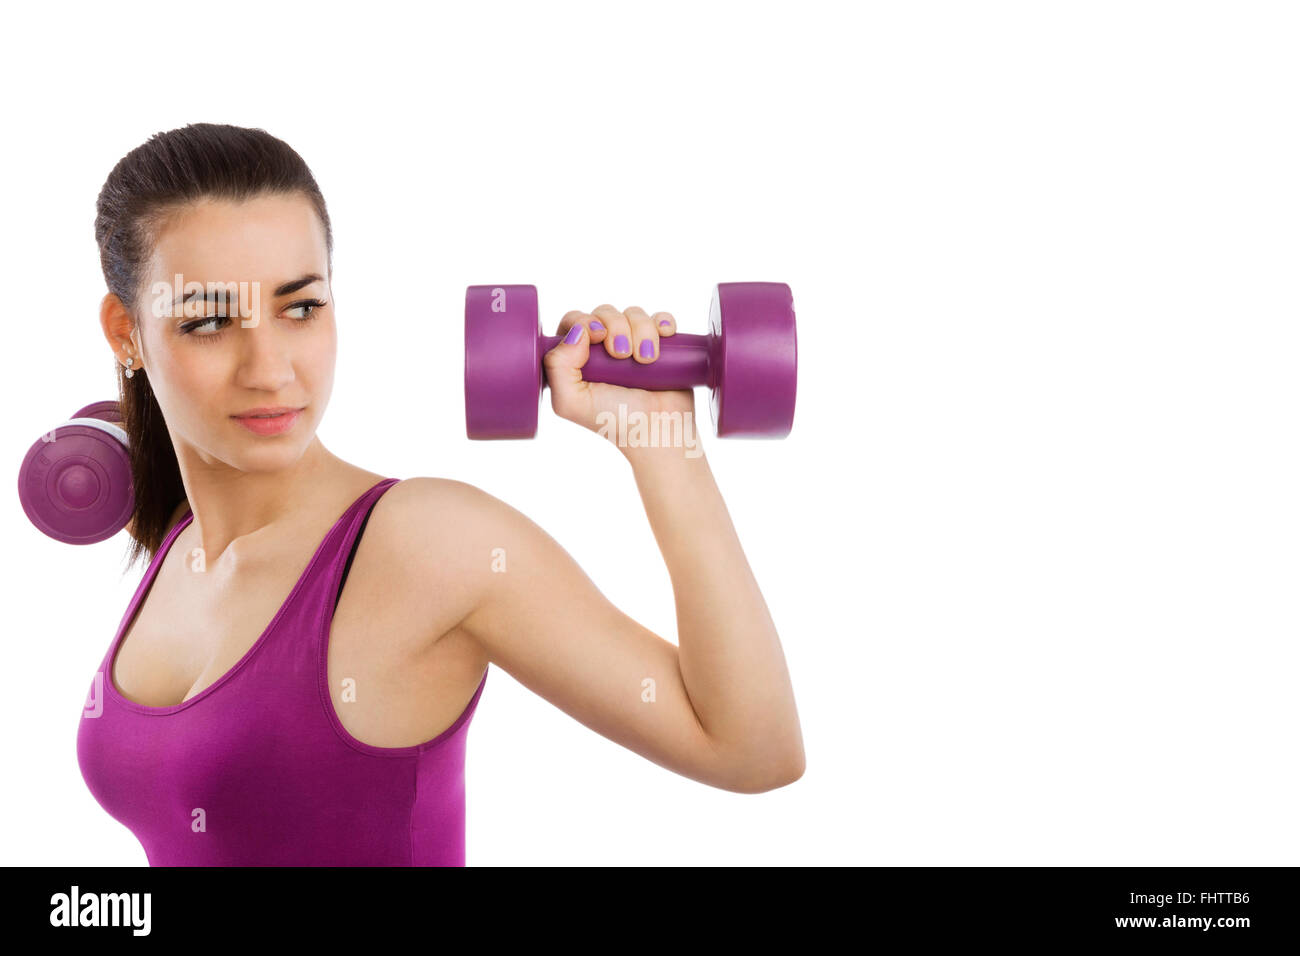 Workout Fitness Meaning Getting Fit And Training Stock Photo